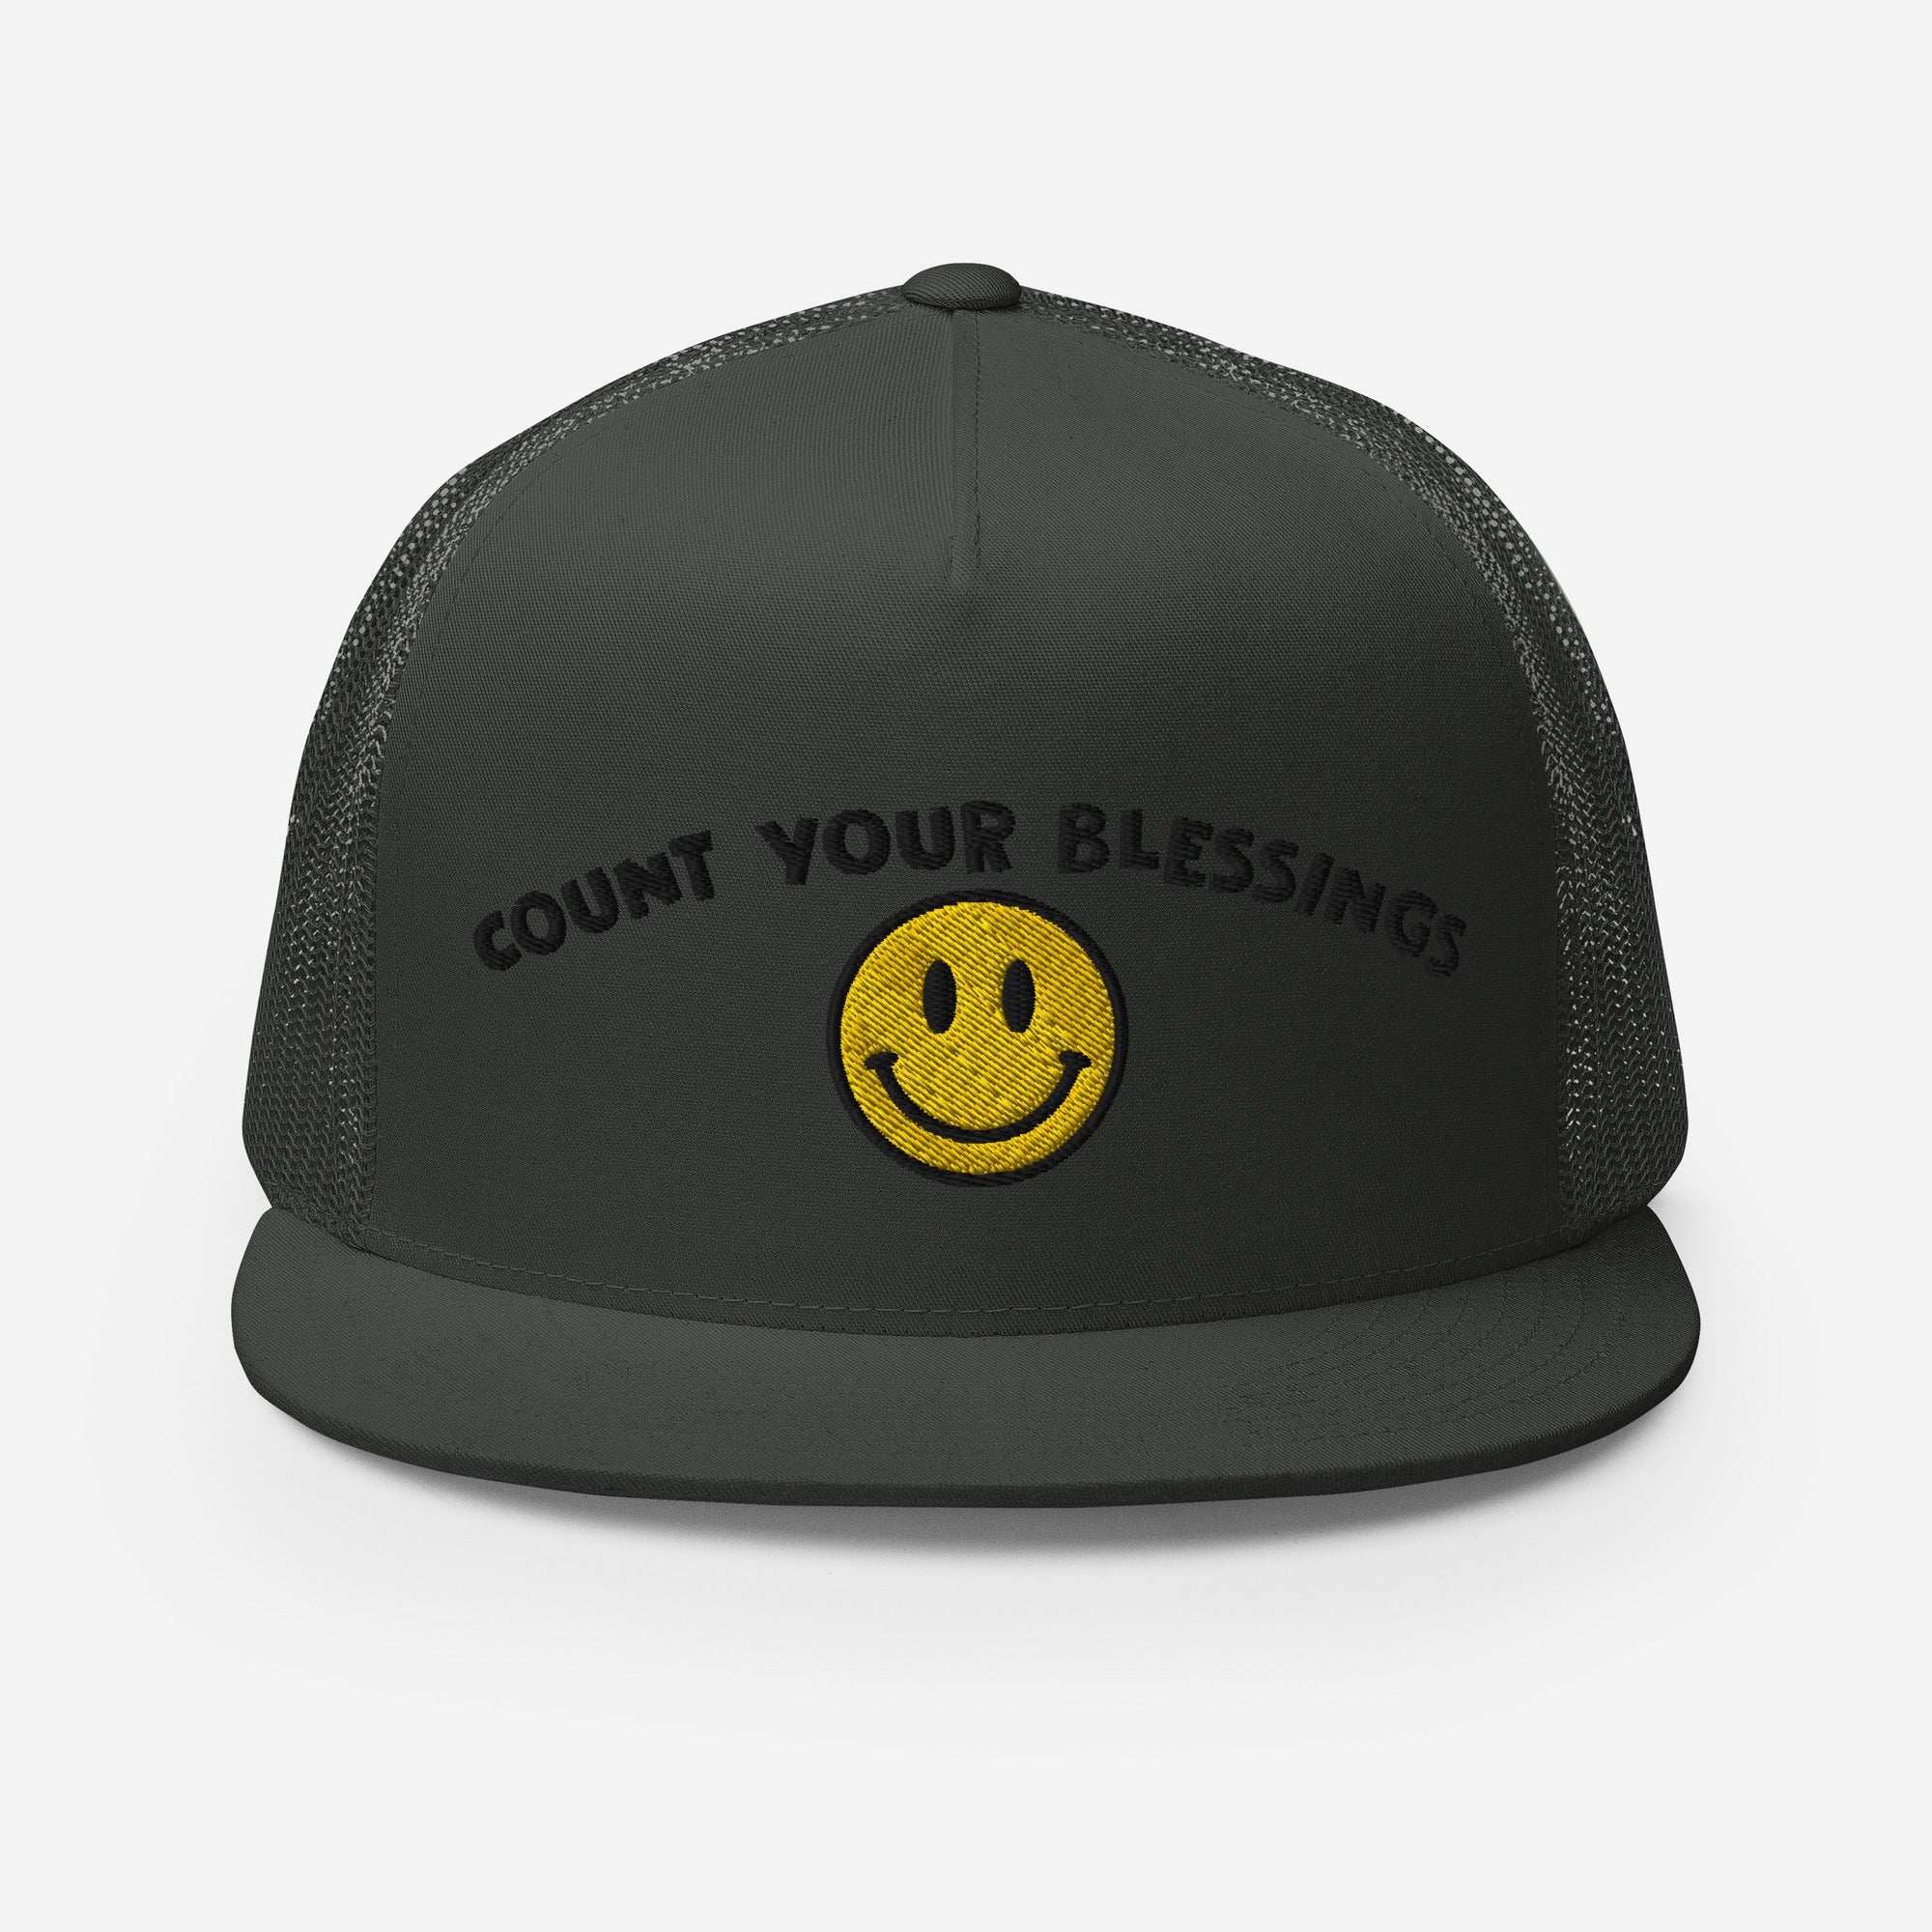 Count Your Blessings Embroidered Trucker Cap